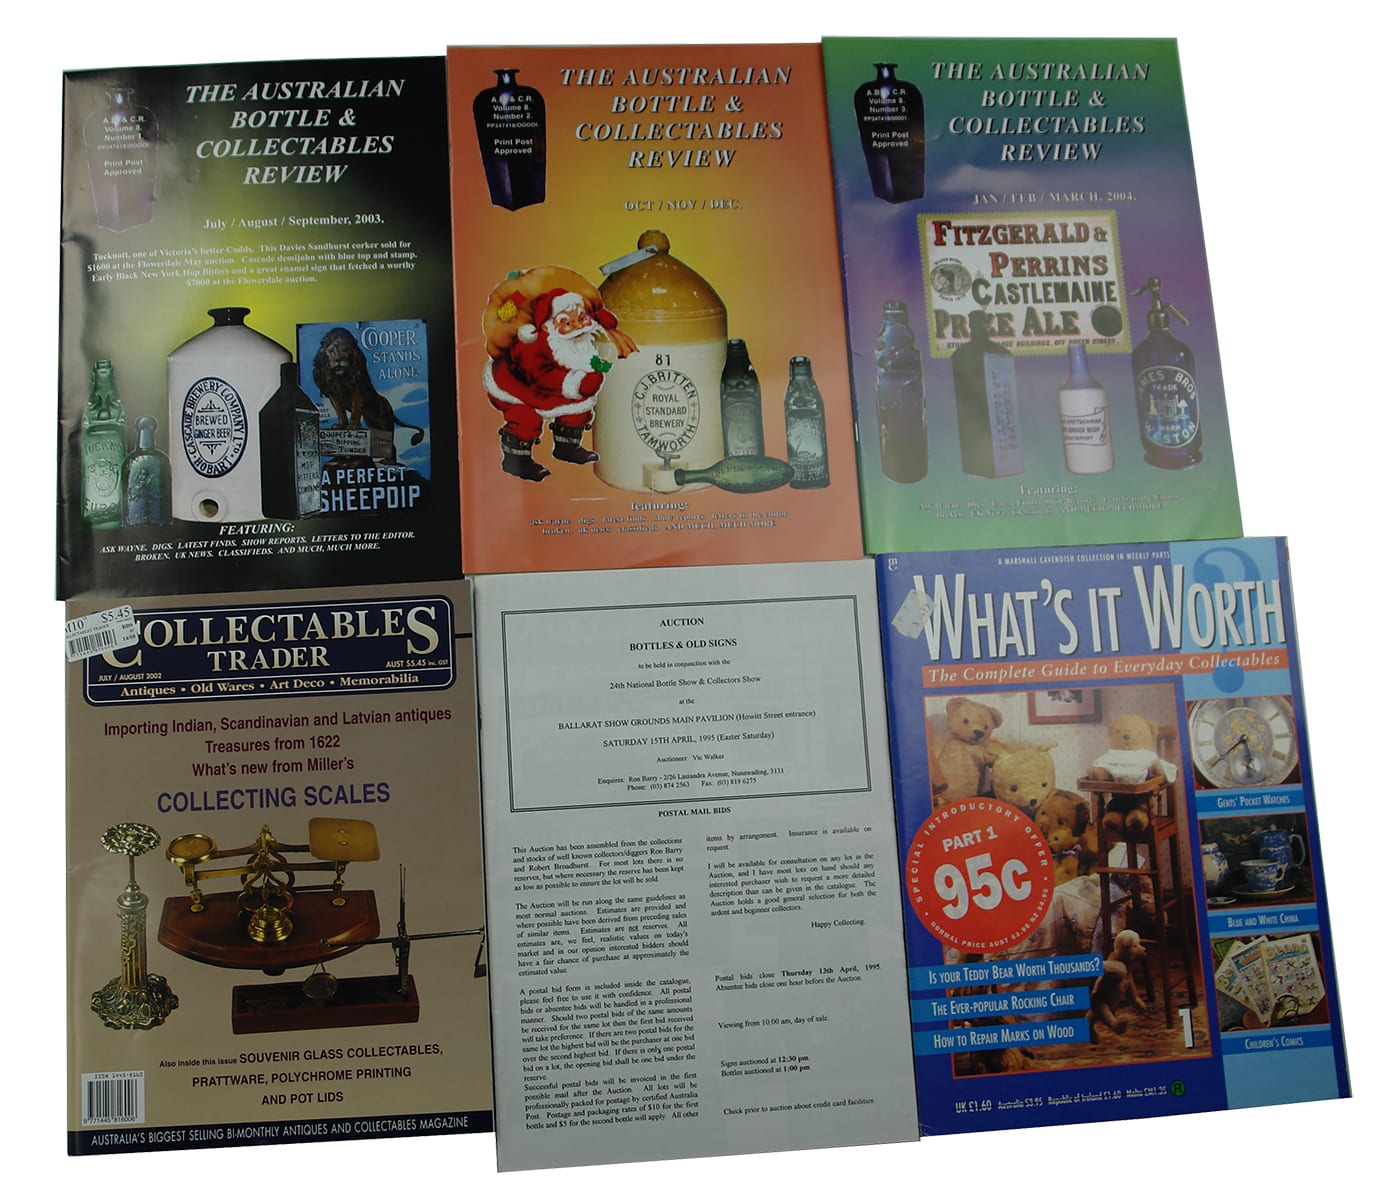 Australian Bottle and Collectables Review Magazines